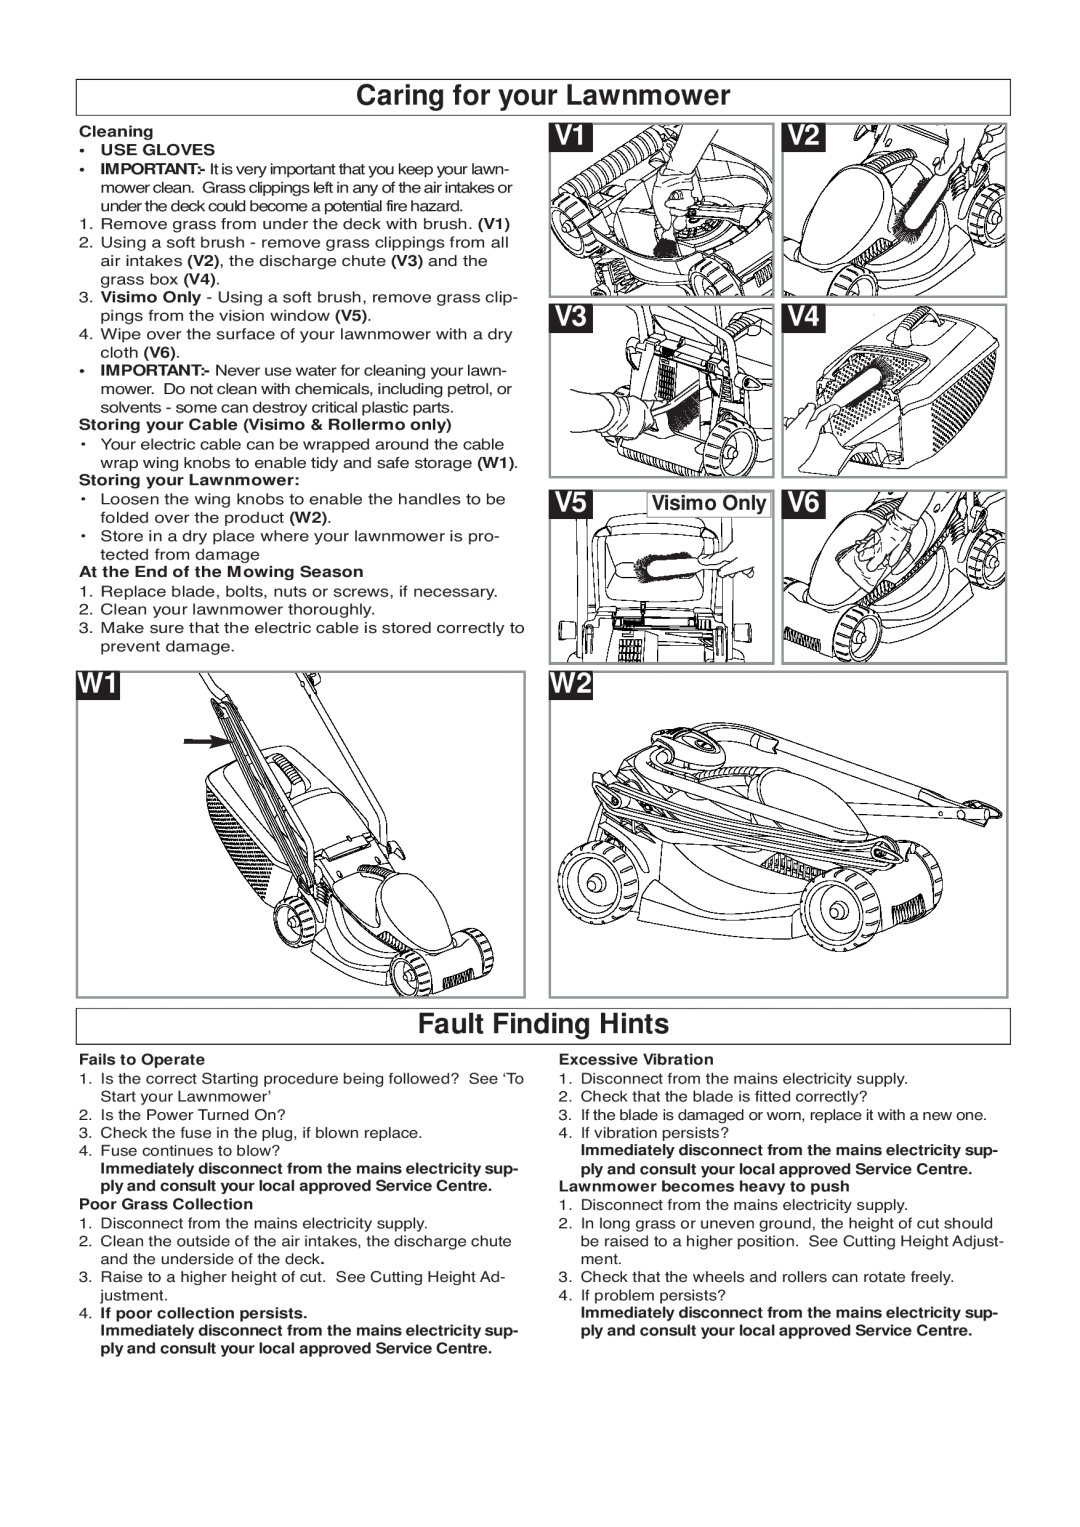 Flymo VM032 Caring for your Lawnmower, Fault Finding Hints, Visimo Only, Cleaning, Use Gloves, Storing your Lawnmower 